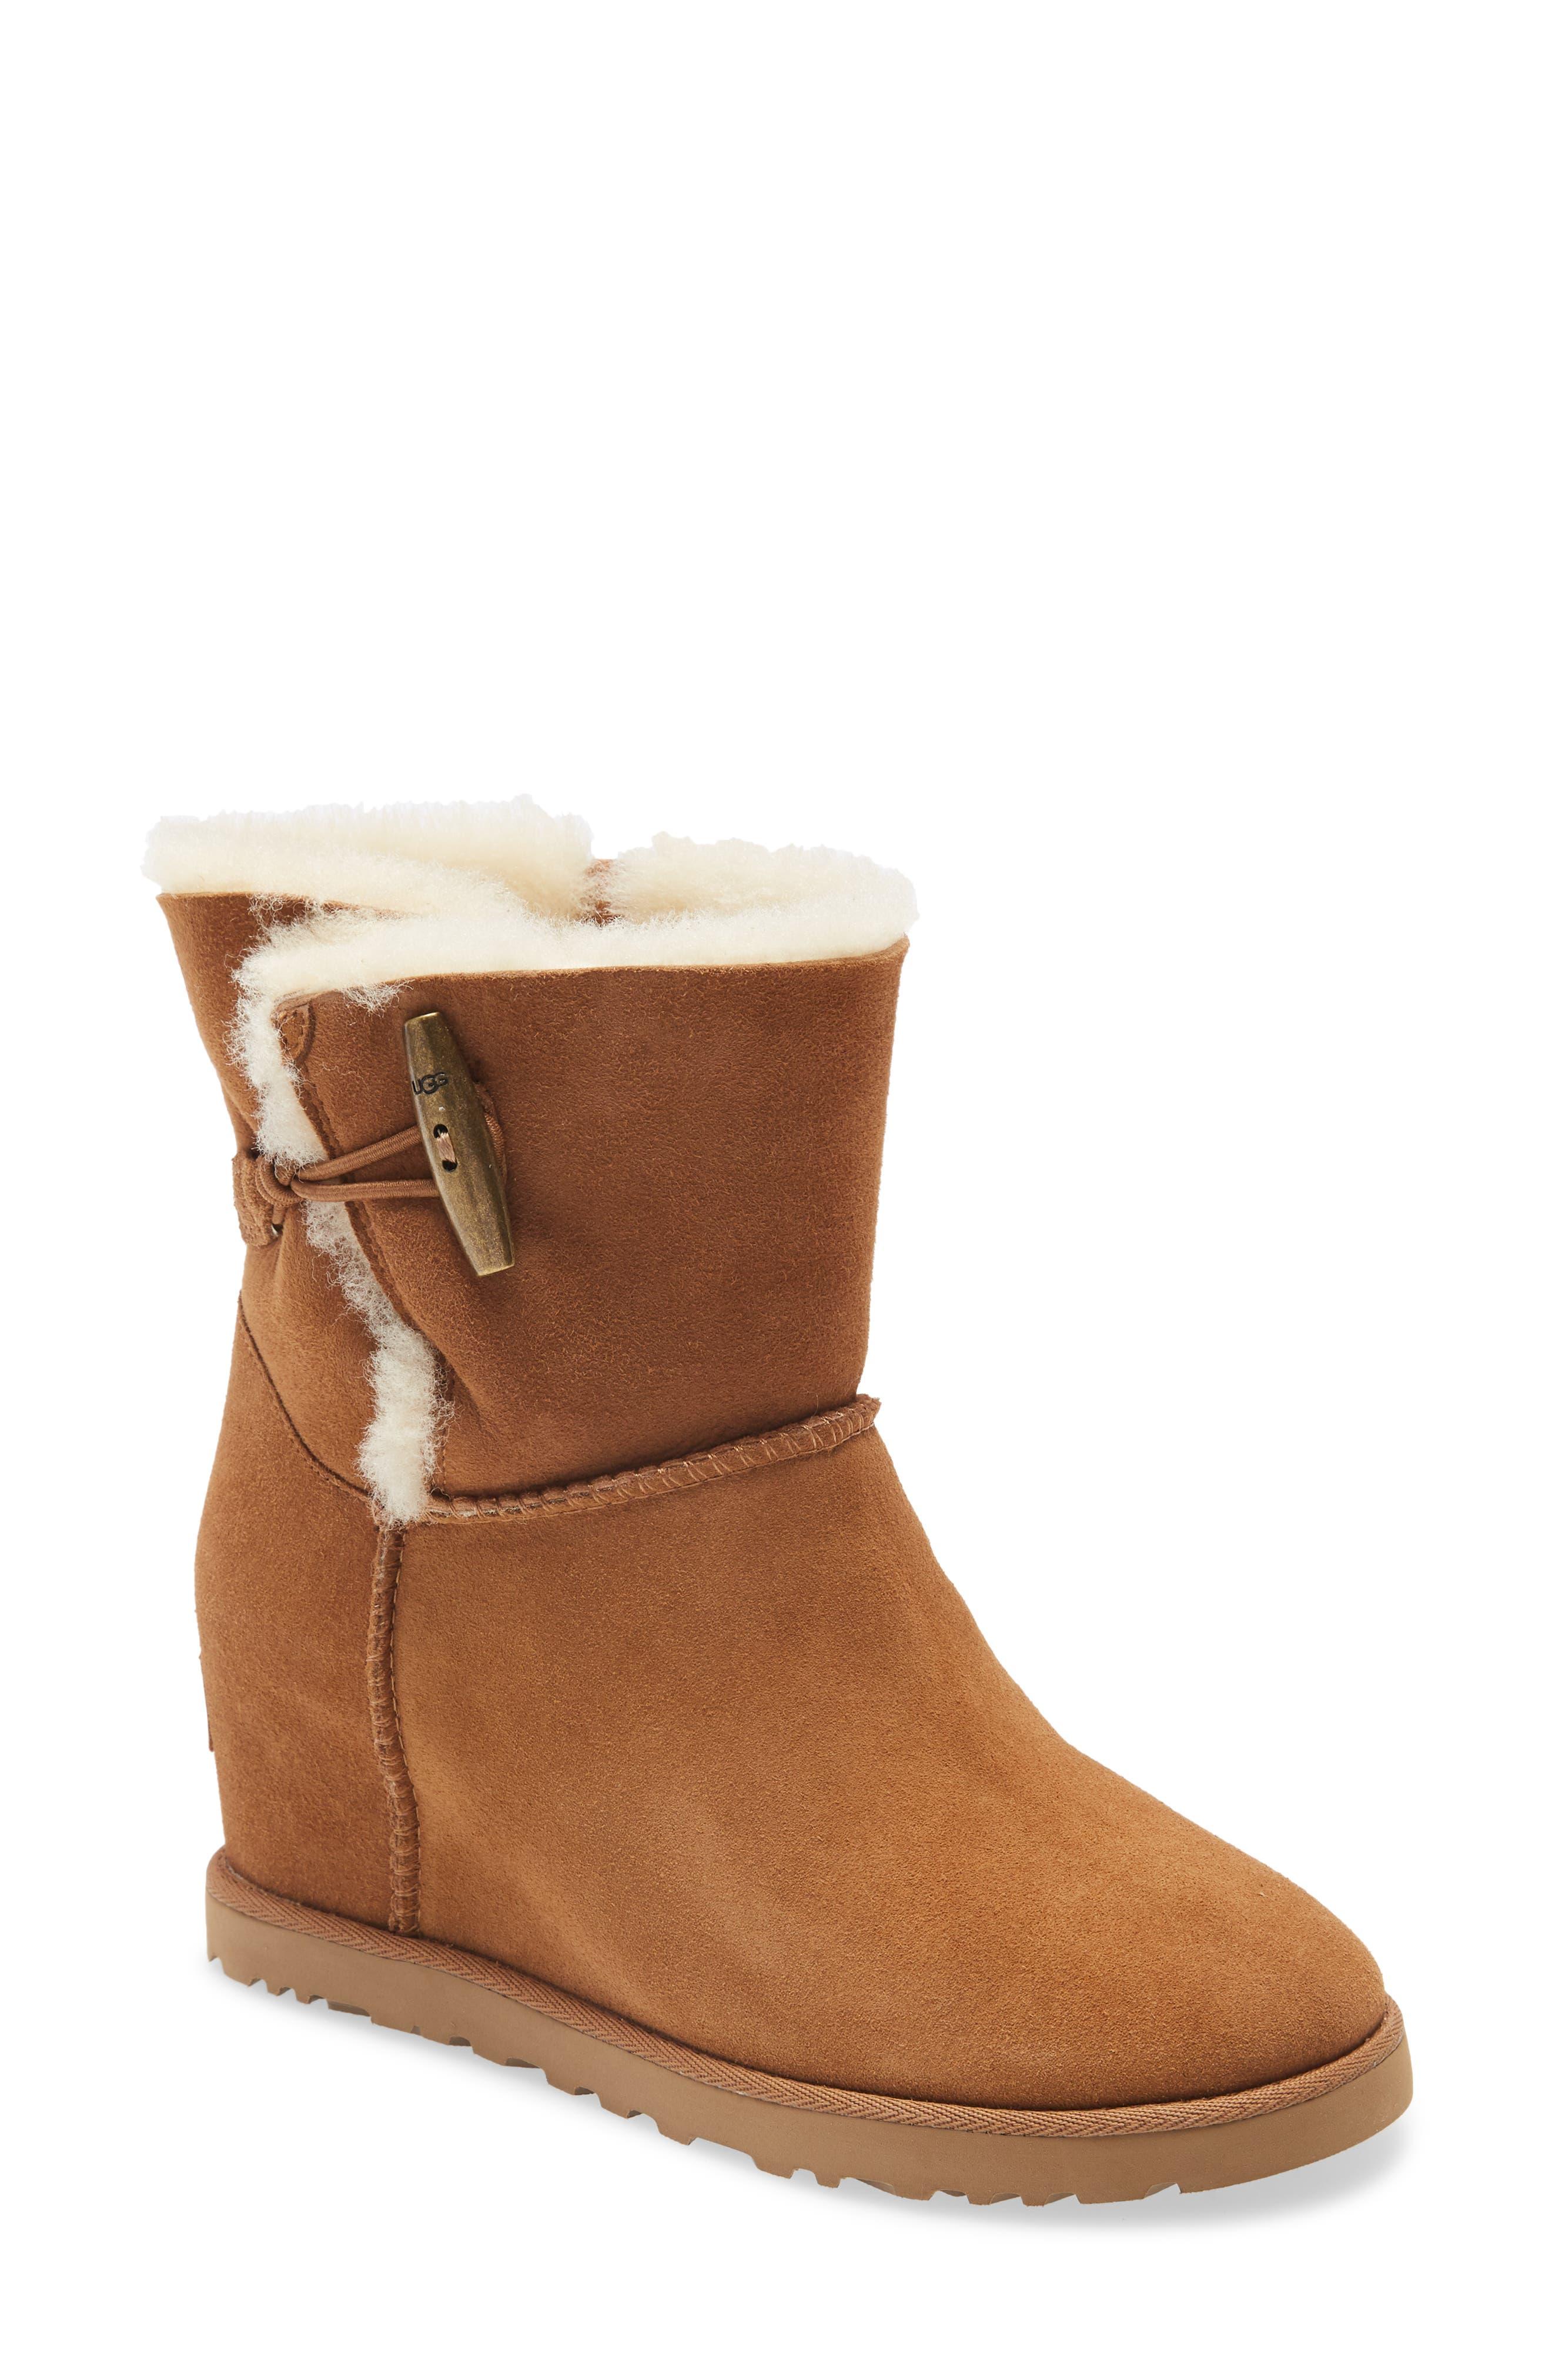 UGG Wool UGG Classic Femme Toggle Wedge Boot in Chestnut Suede (Brown) |  Lyst